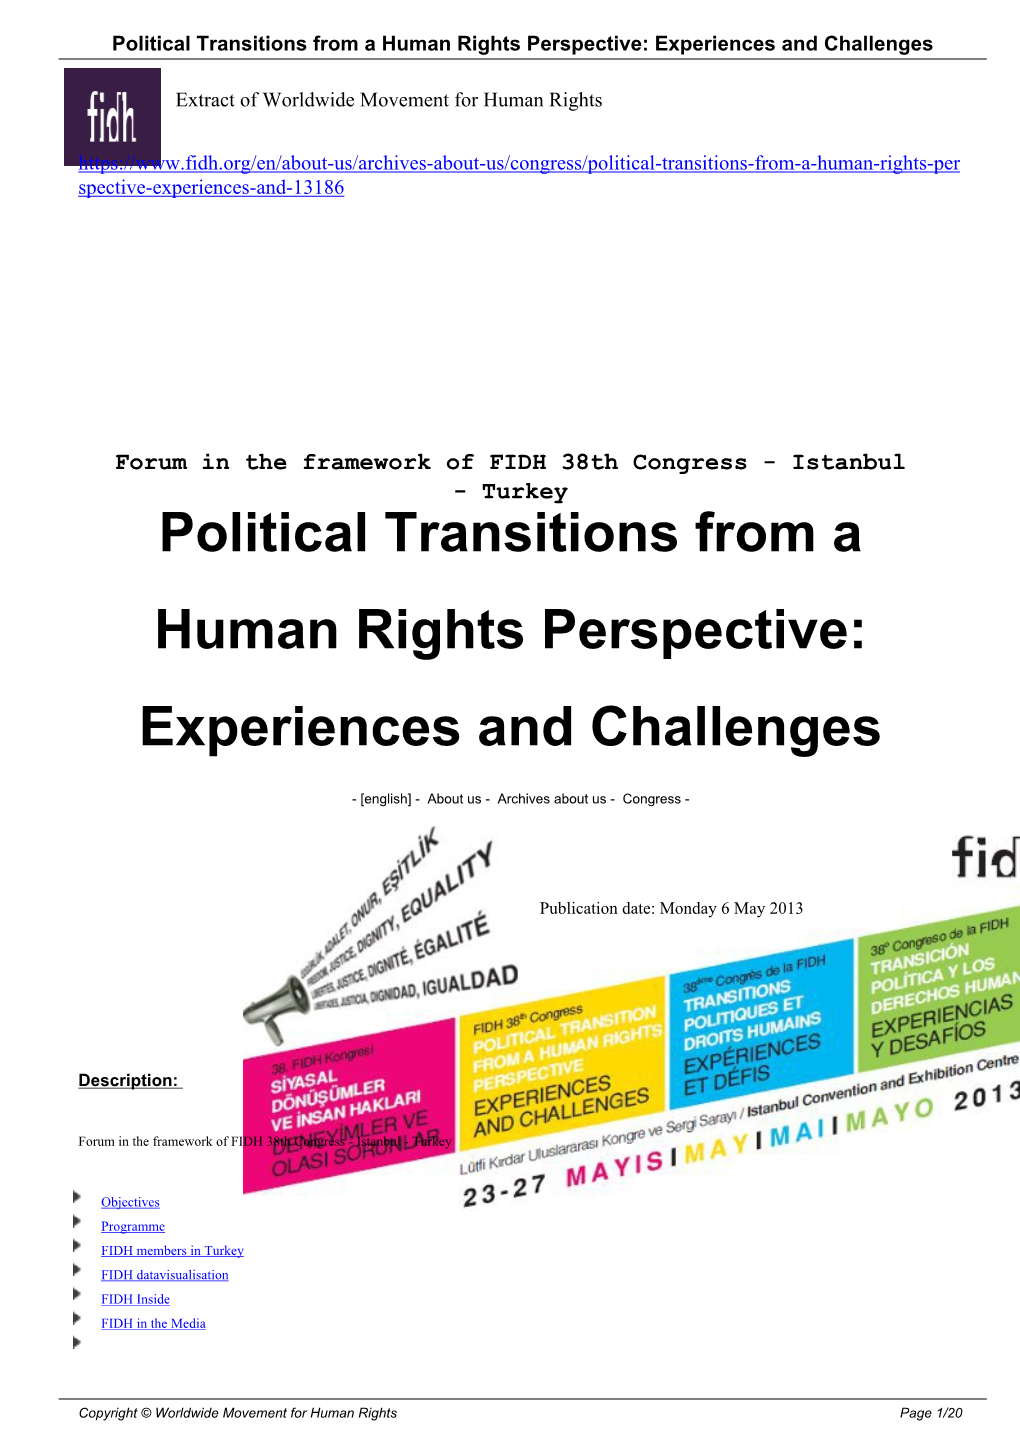 Political Transitions from a Human Rights Perspective: Experiences and Challenges